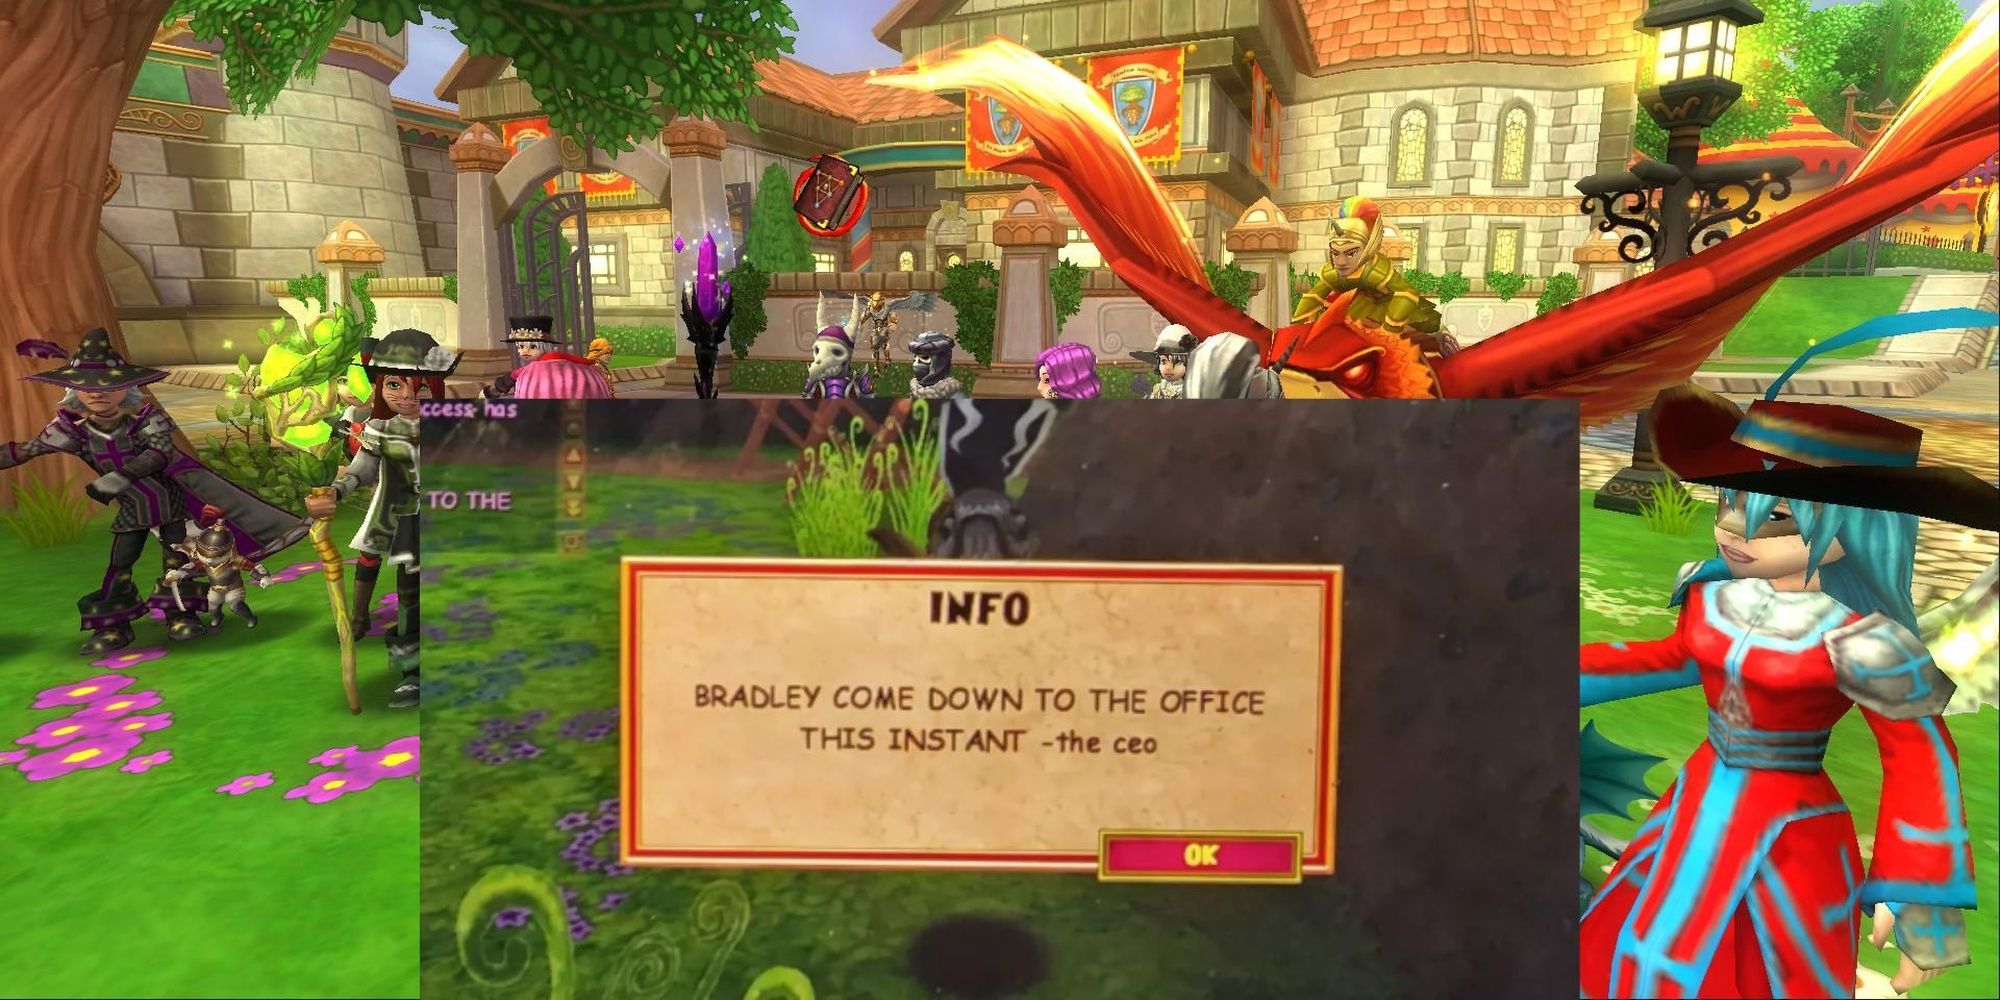 Wizard 101 Shut Down By Spammer Info Box Bradley Come Down To Office This Instant